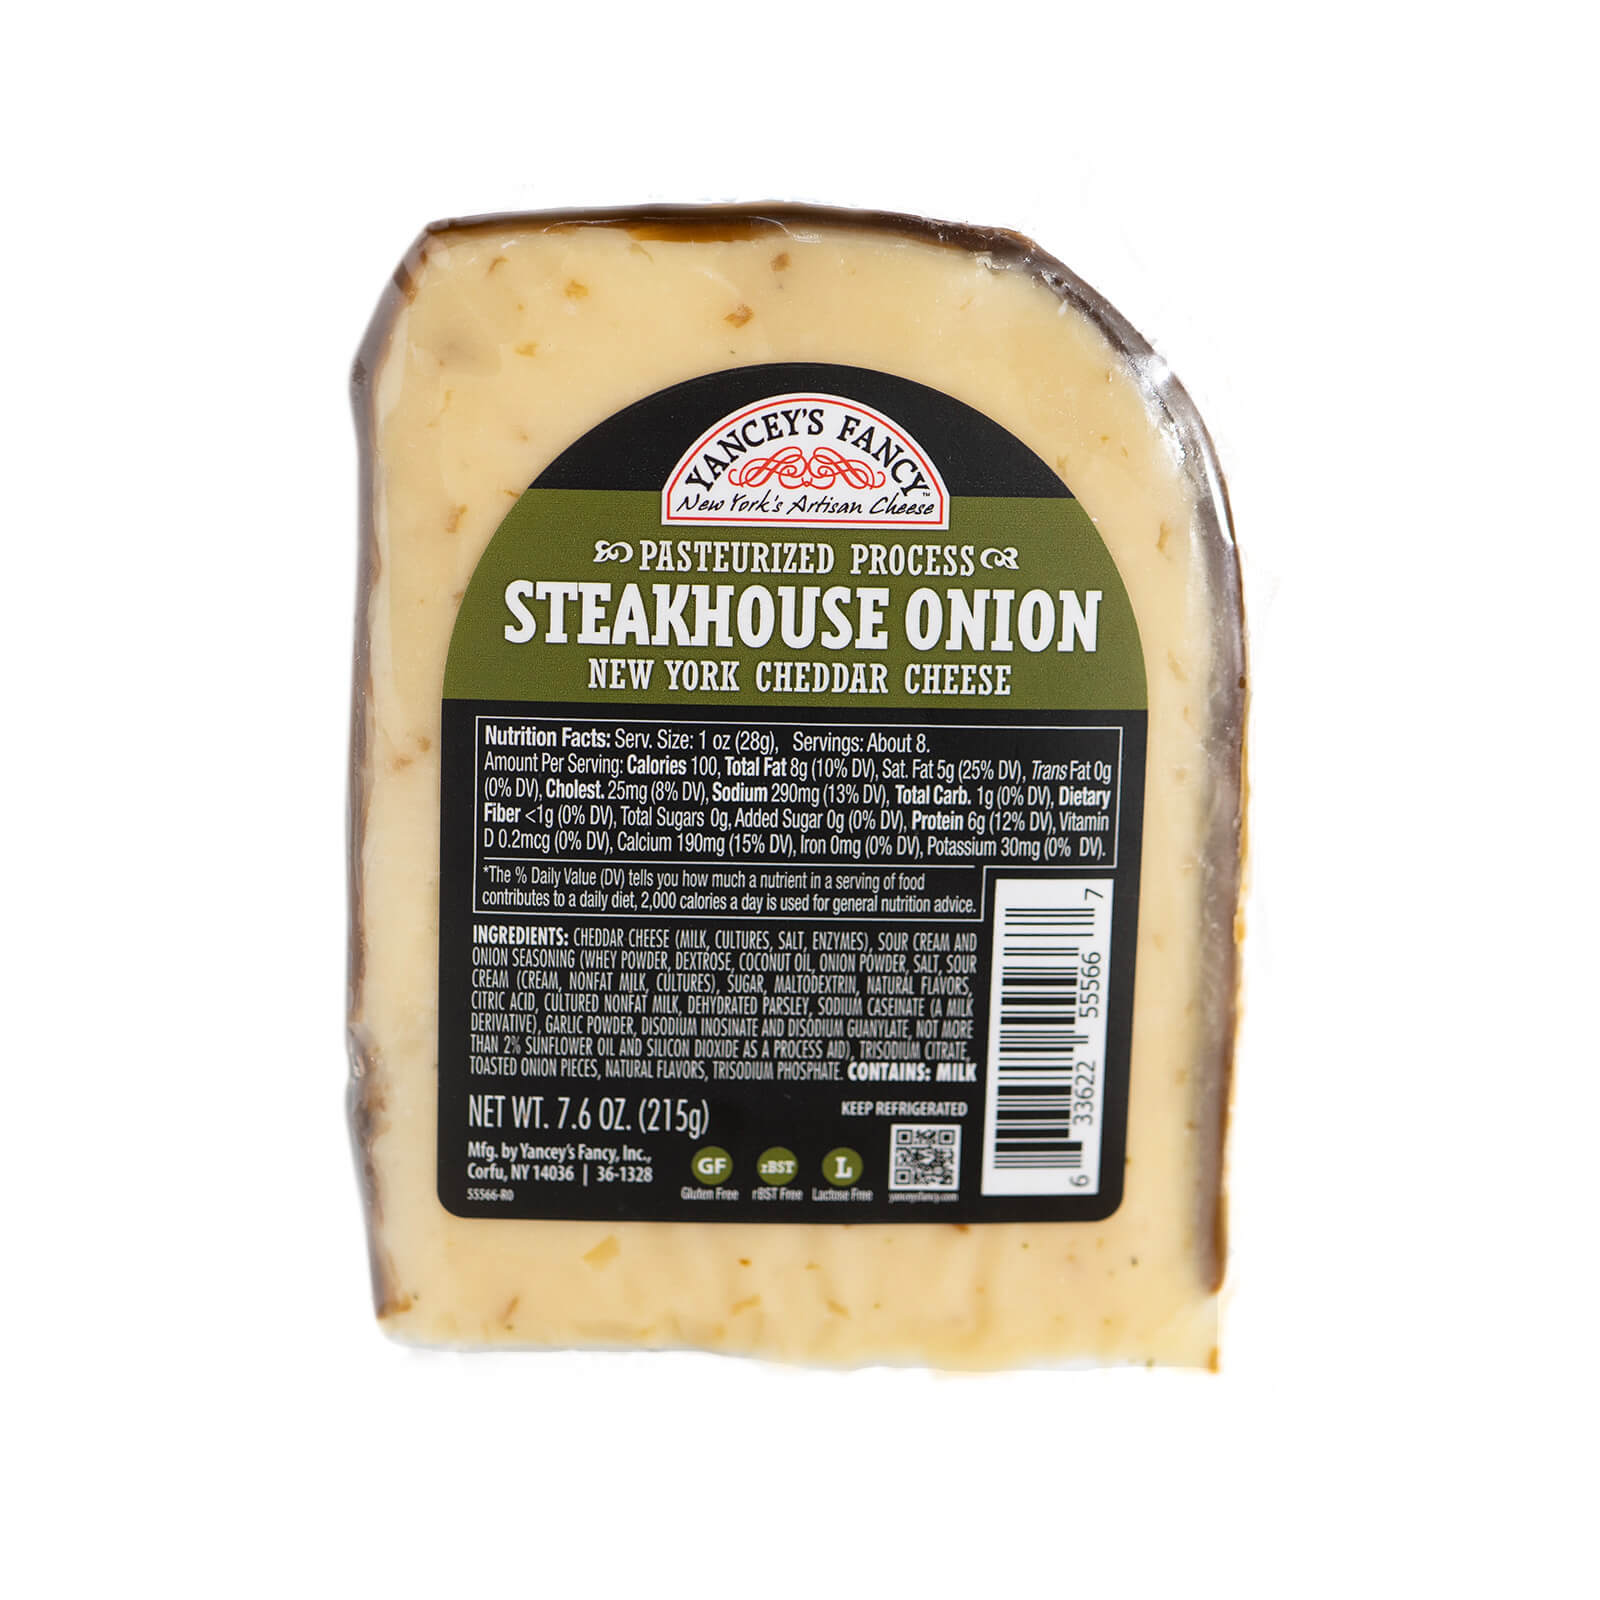 Steakhouse Onion New York Cheddar Cheese - Yancey's Fancy - 7.6oz w/ Nutrition Facts